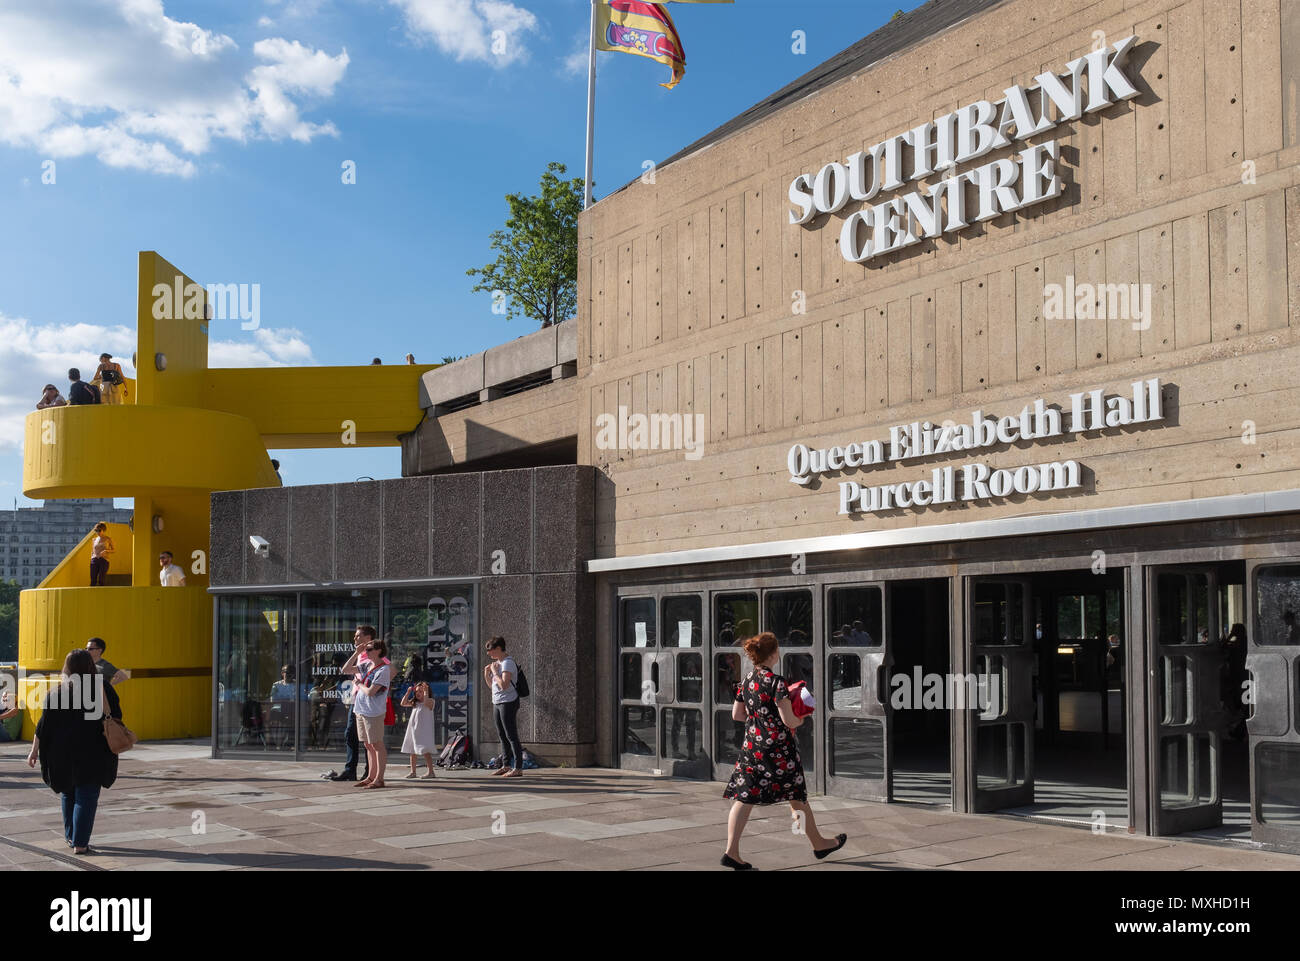 Queen Elizabeth Hall und Purcell Room, Southbank Centre, London, England Stockfoto